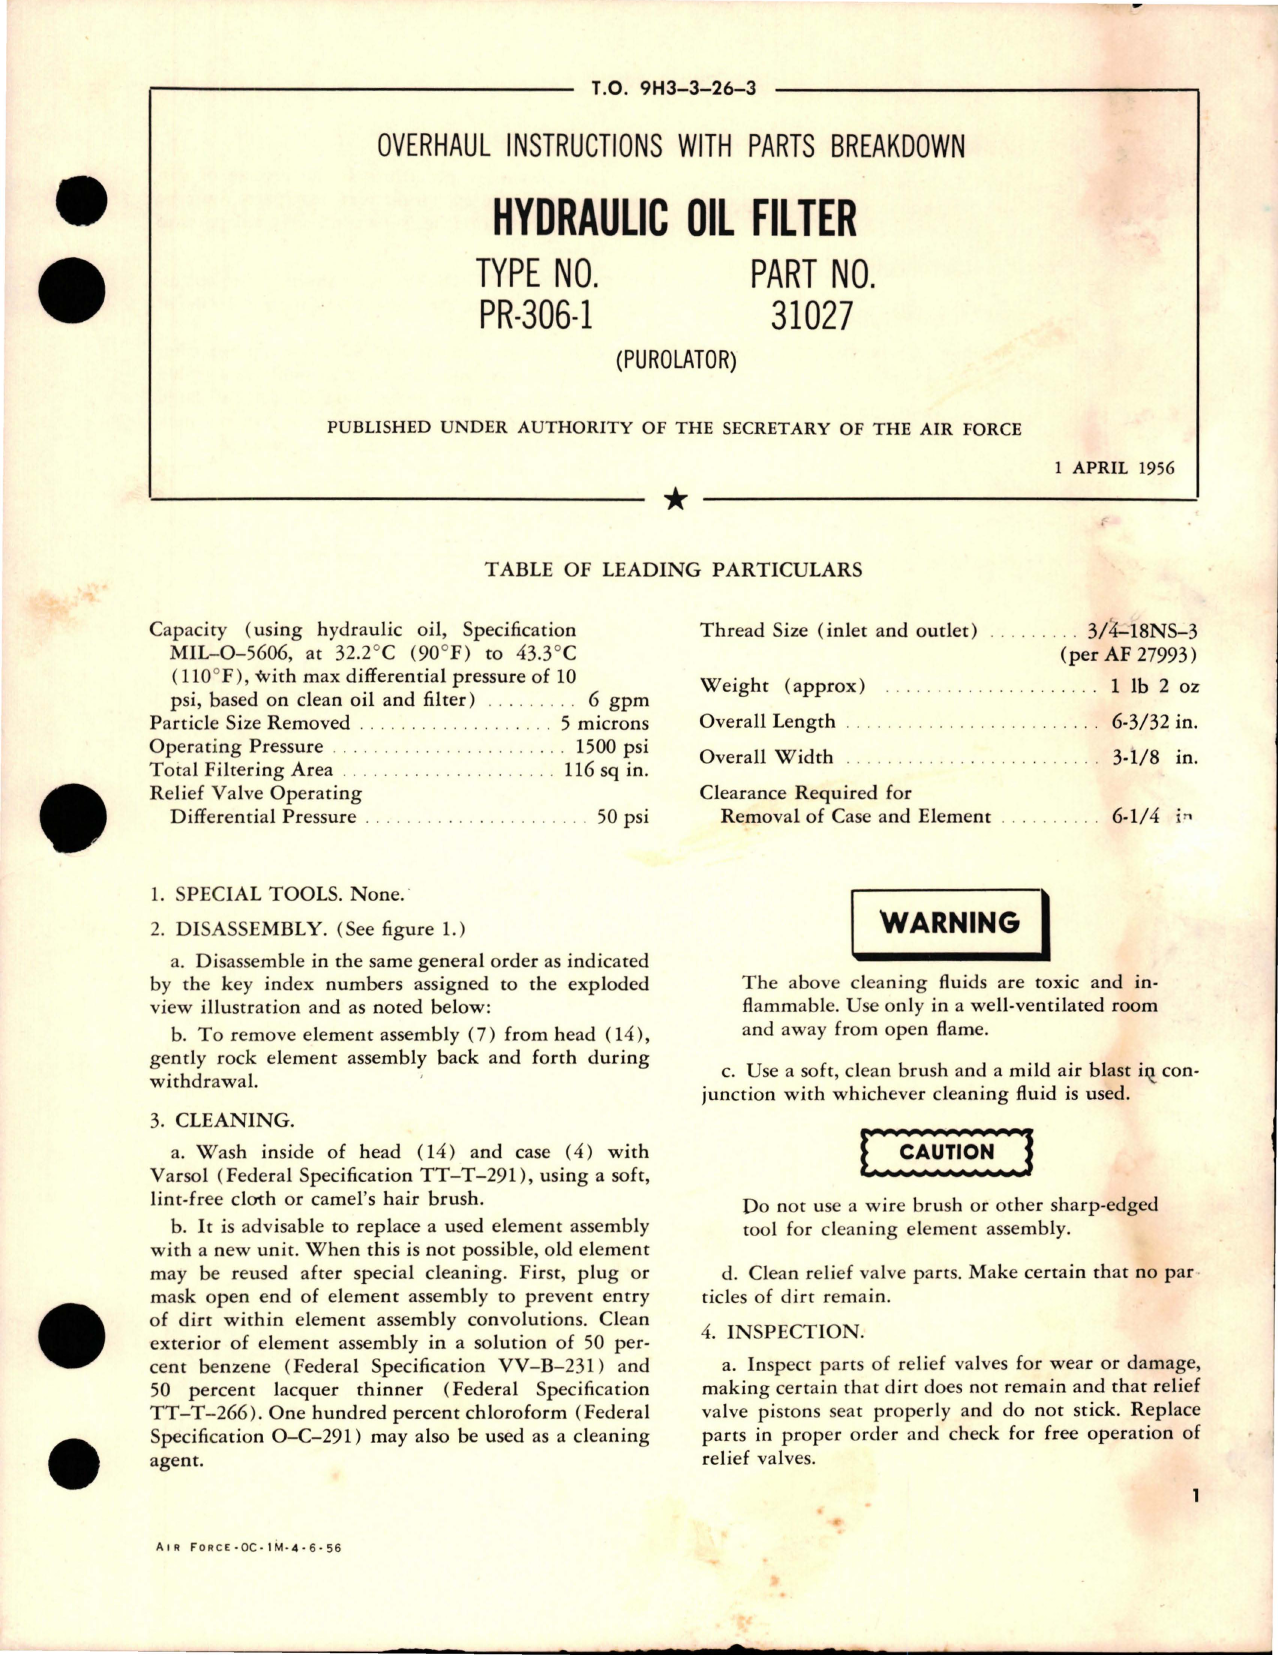 Sample page 1 from AirCorps Library document: Overhaul Instructions with Parts for Hydraulic Oil Filter - Type PR-306-1 - Part 31027 